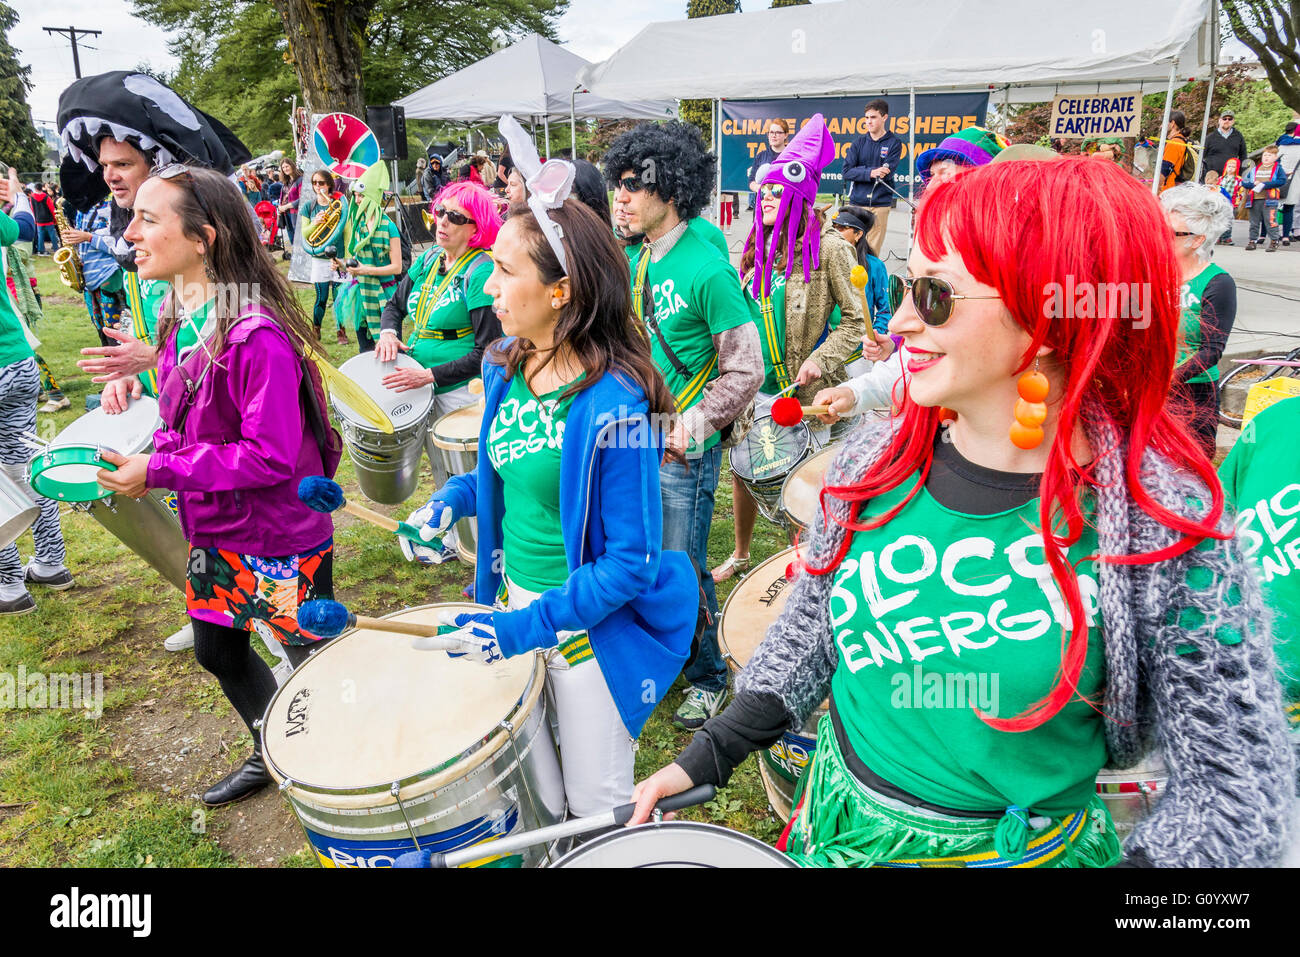 Drum group Bloco Energia perform at Earth Day Rally, Vancouver, British Columbia, Canada Stock Photo